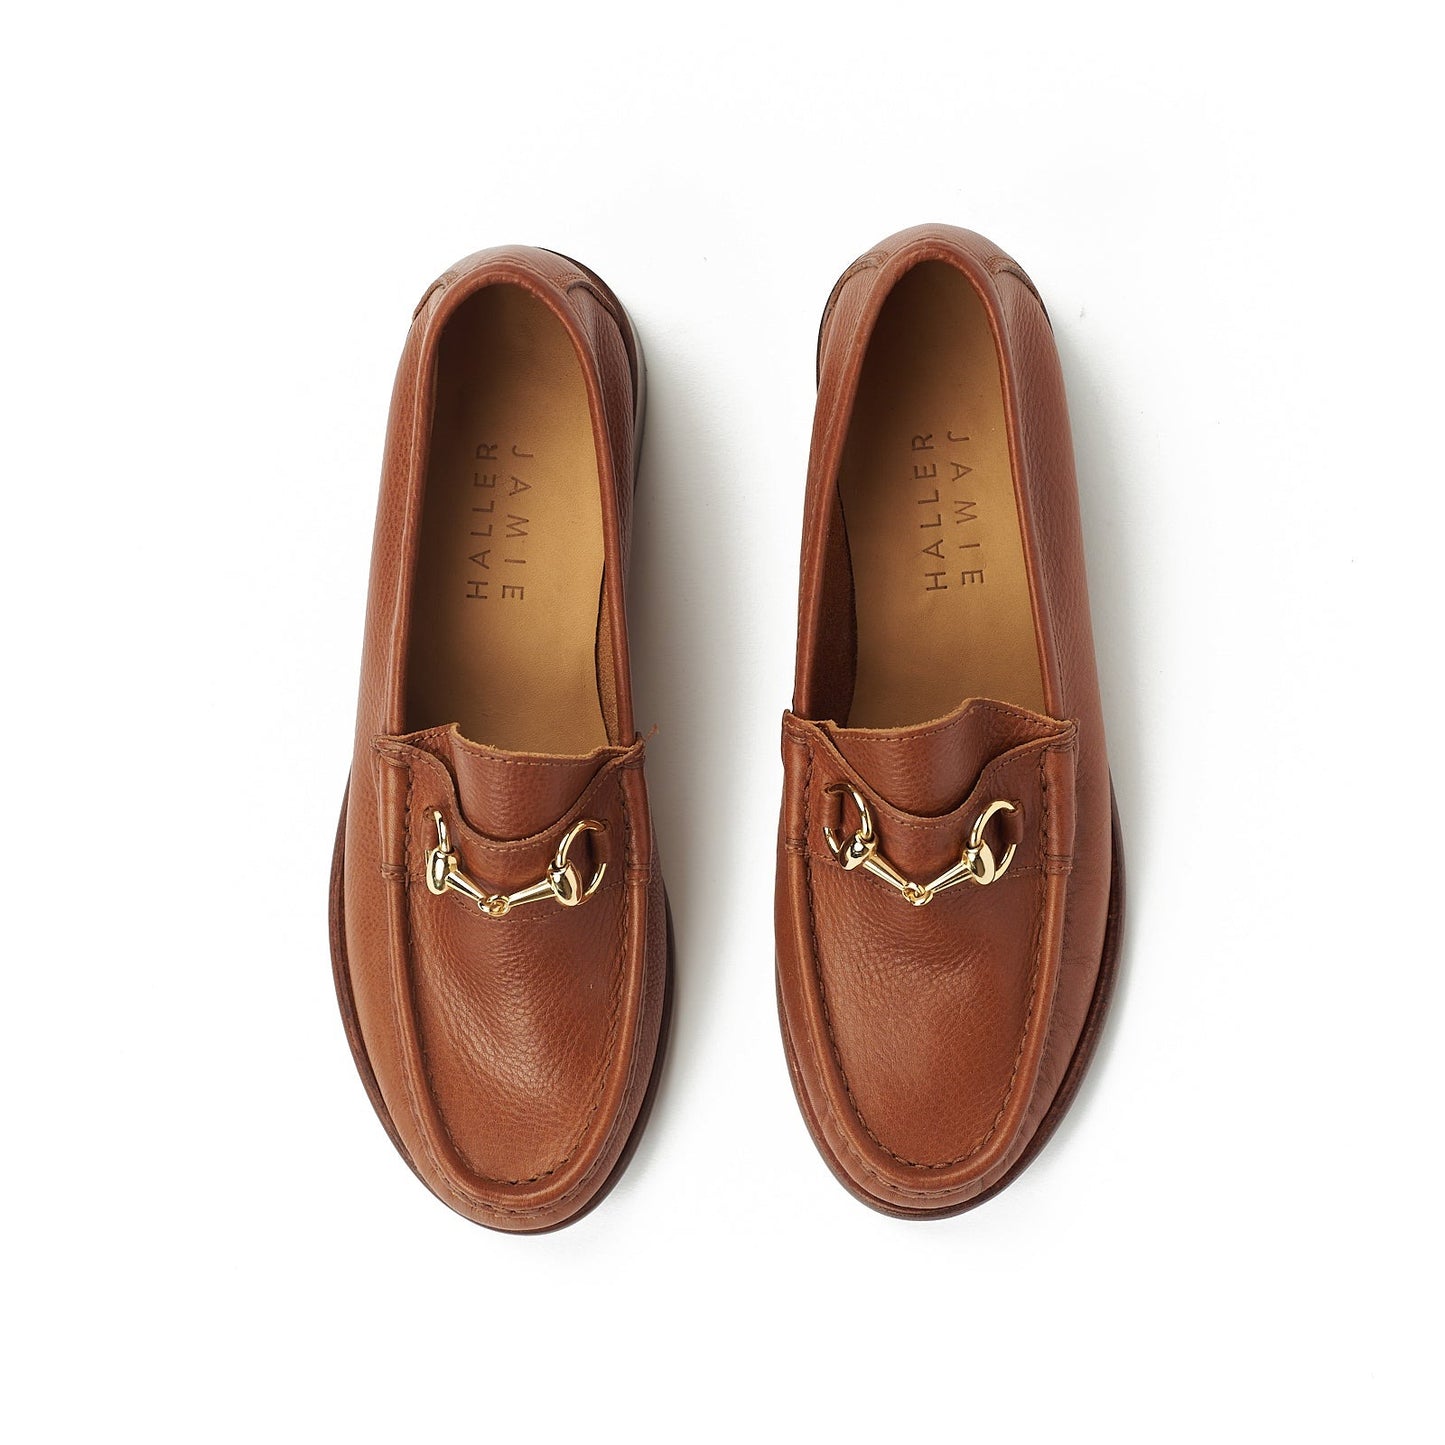 Bit Loafer in Cognac Leather